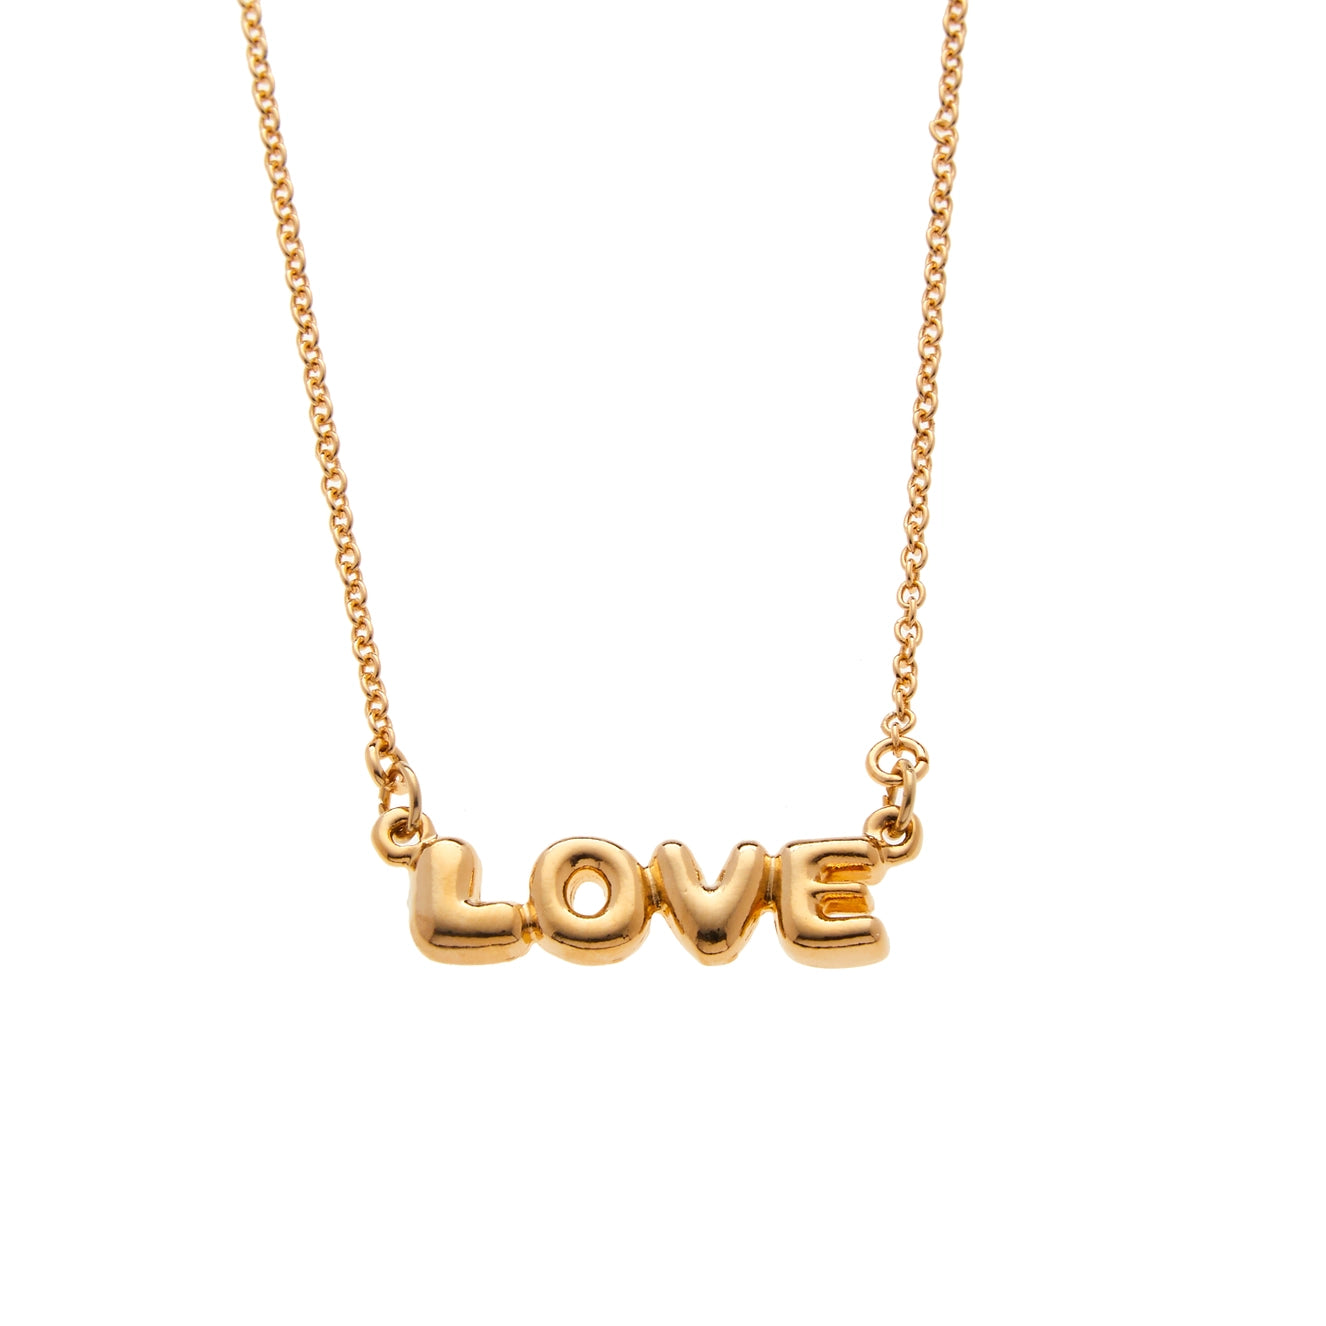 Forever Love Necklace 💝